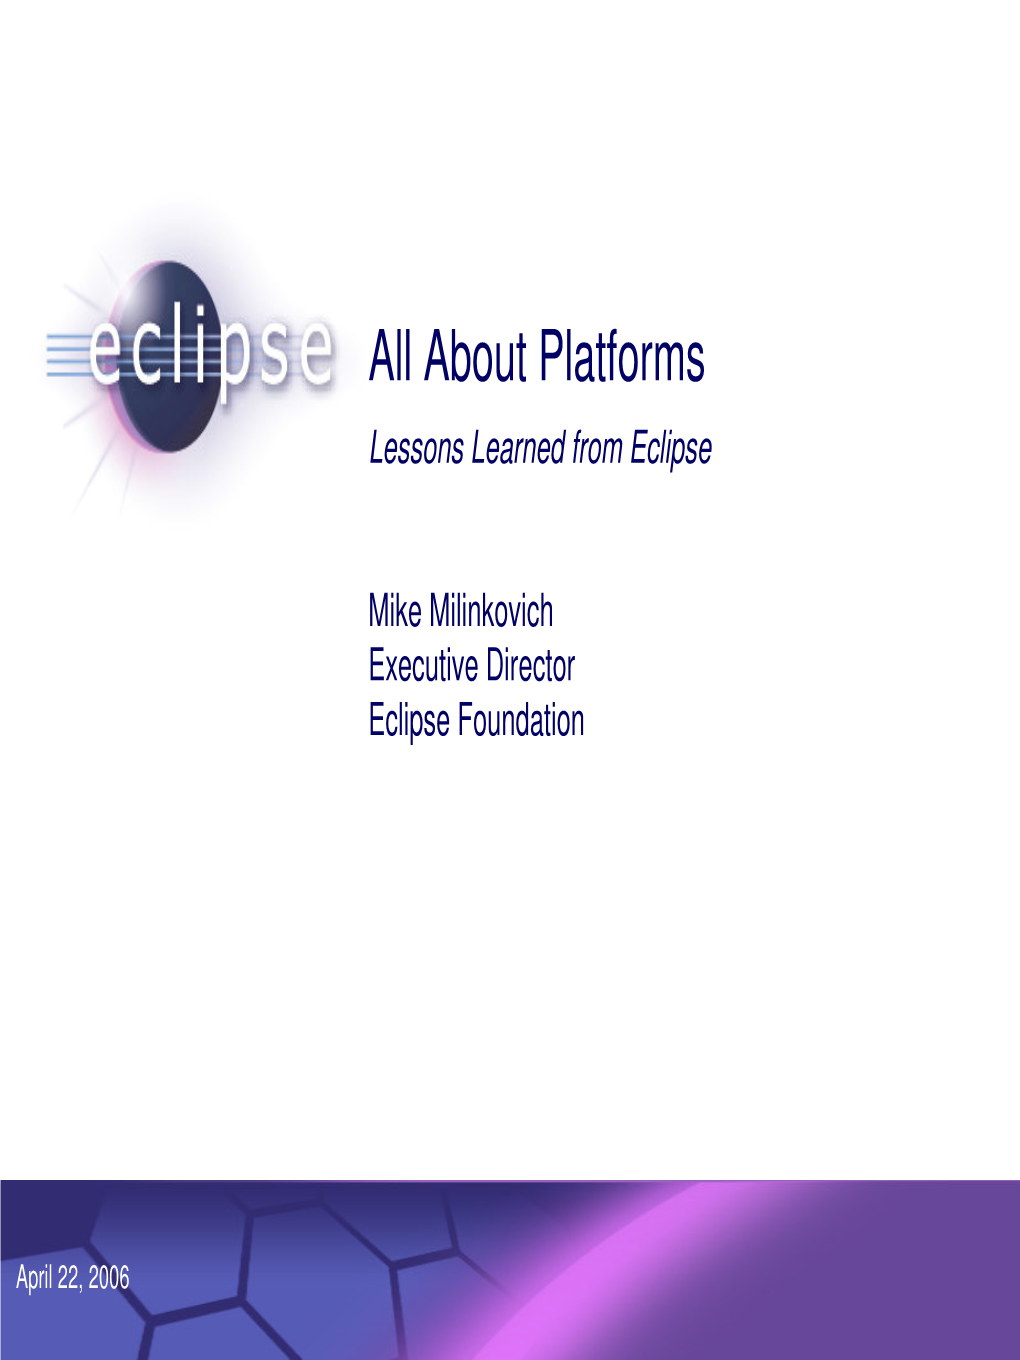 All About Platforms: Lessons Learned from Eclipse